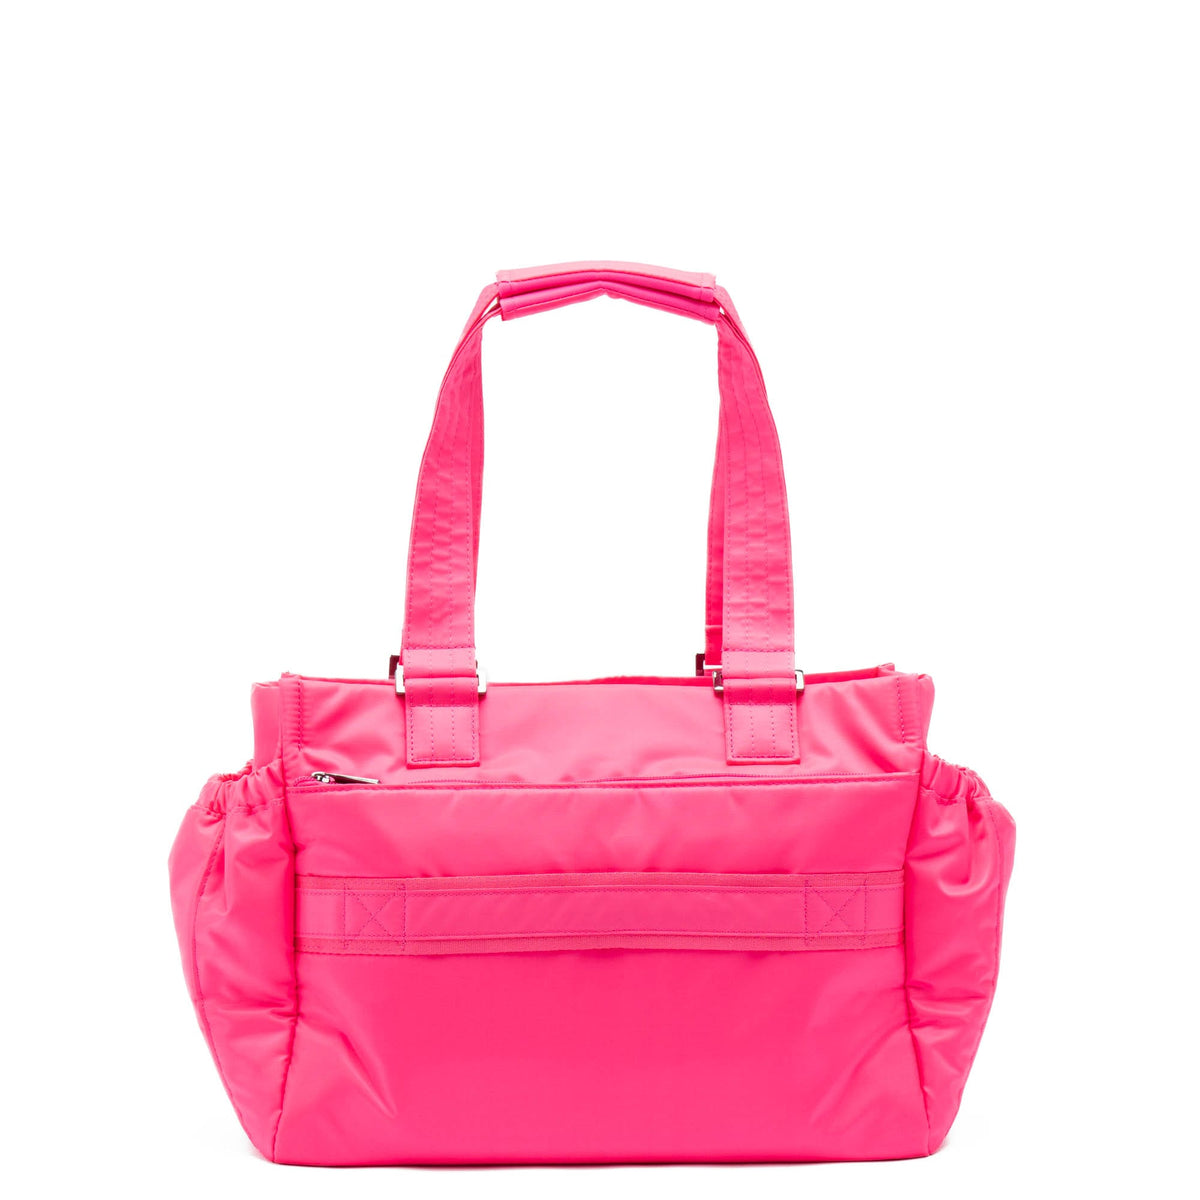 Dilly Dally Convertible Tote Bag